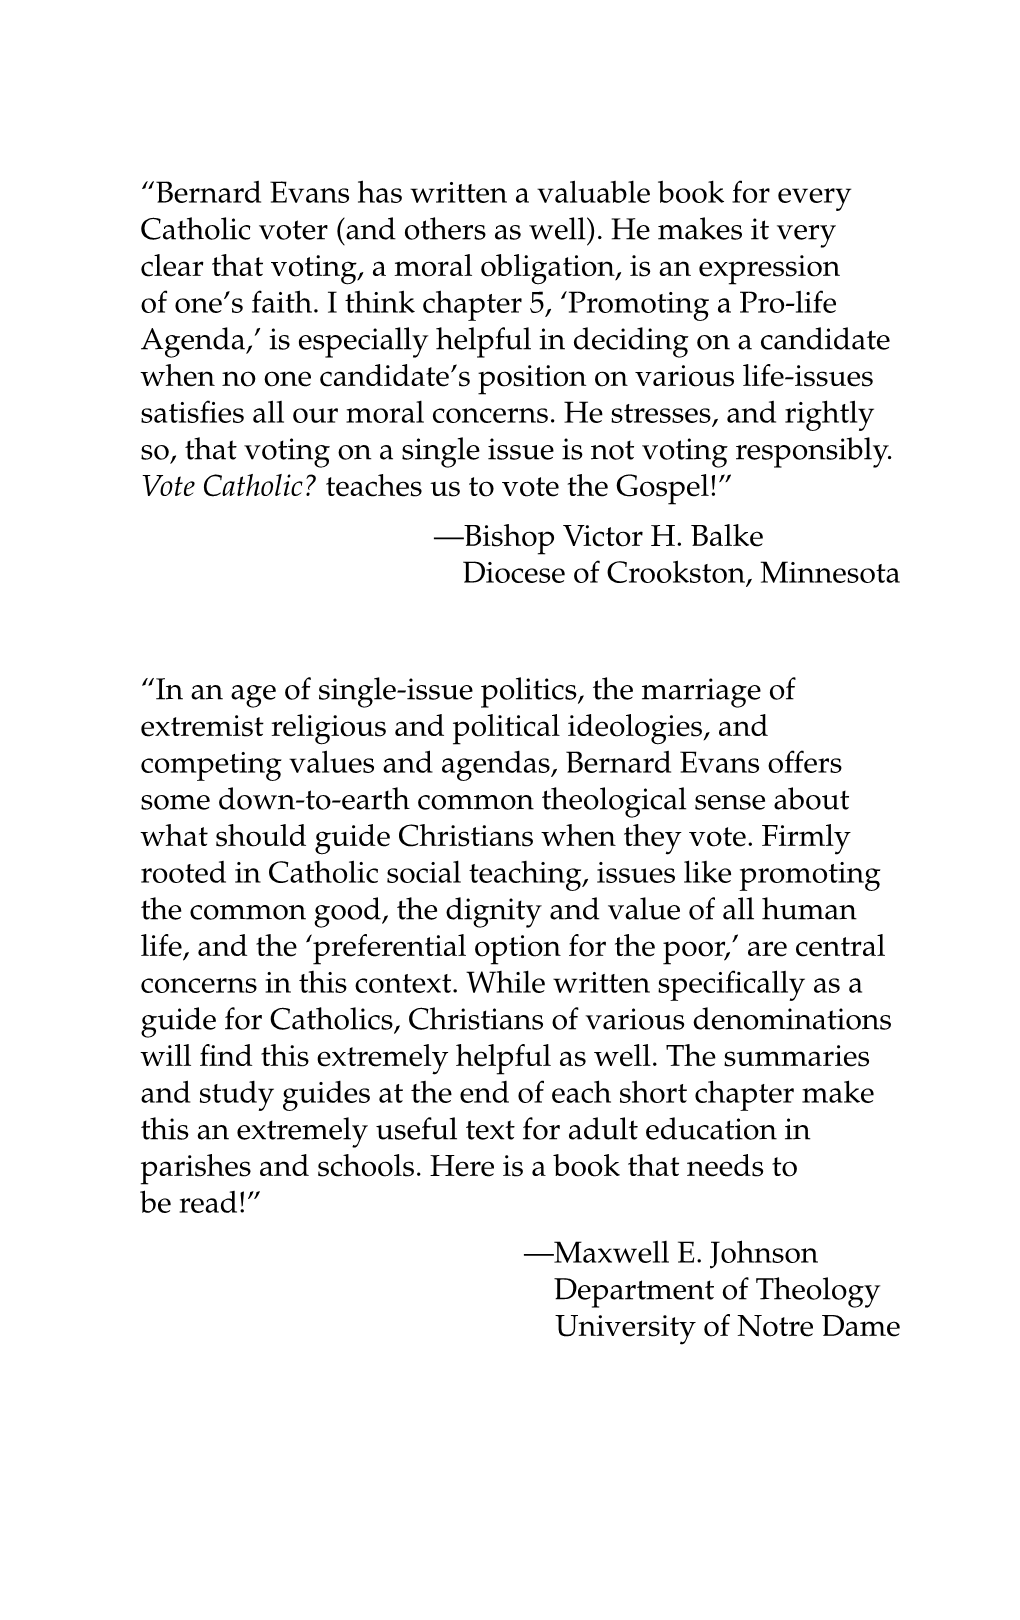 Bernard Evans Has Written a Valuable Book for Every Catholic Voter (And Others As Well)